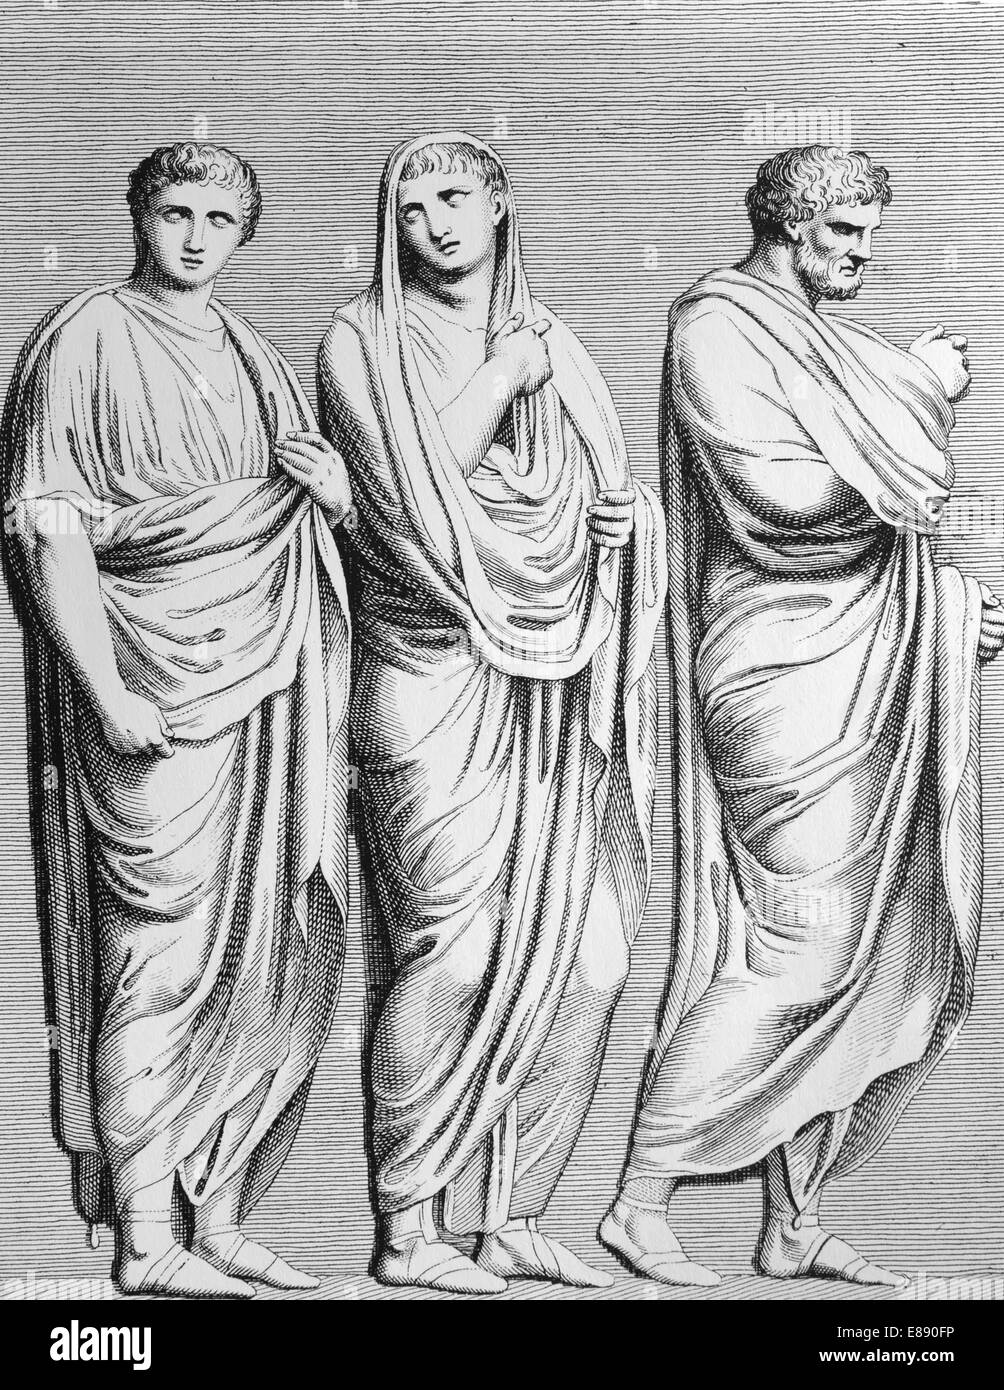 Antiquity. Ancient Rome. Roman togas. Engraving, 19th century. Stock Photo